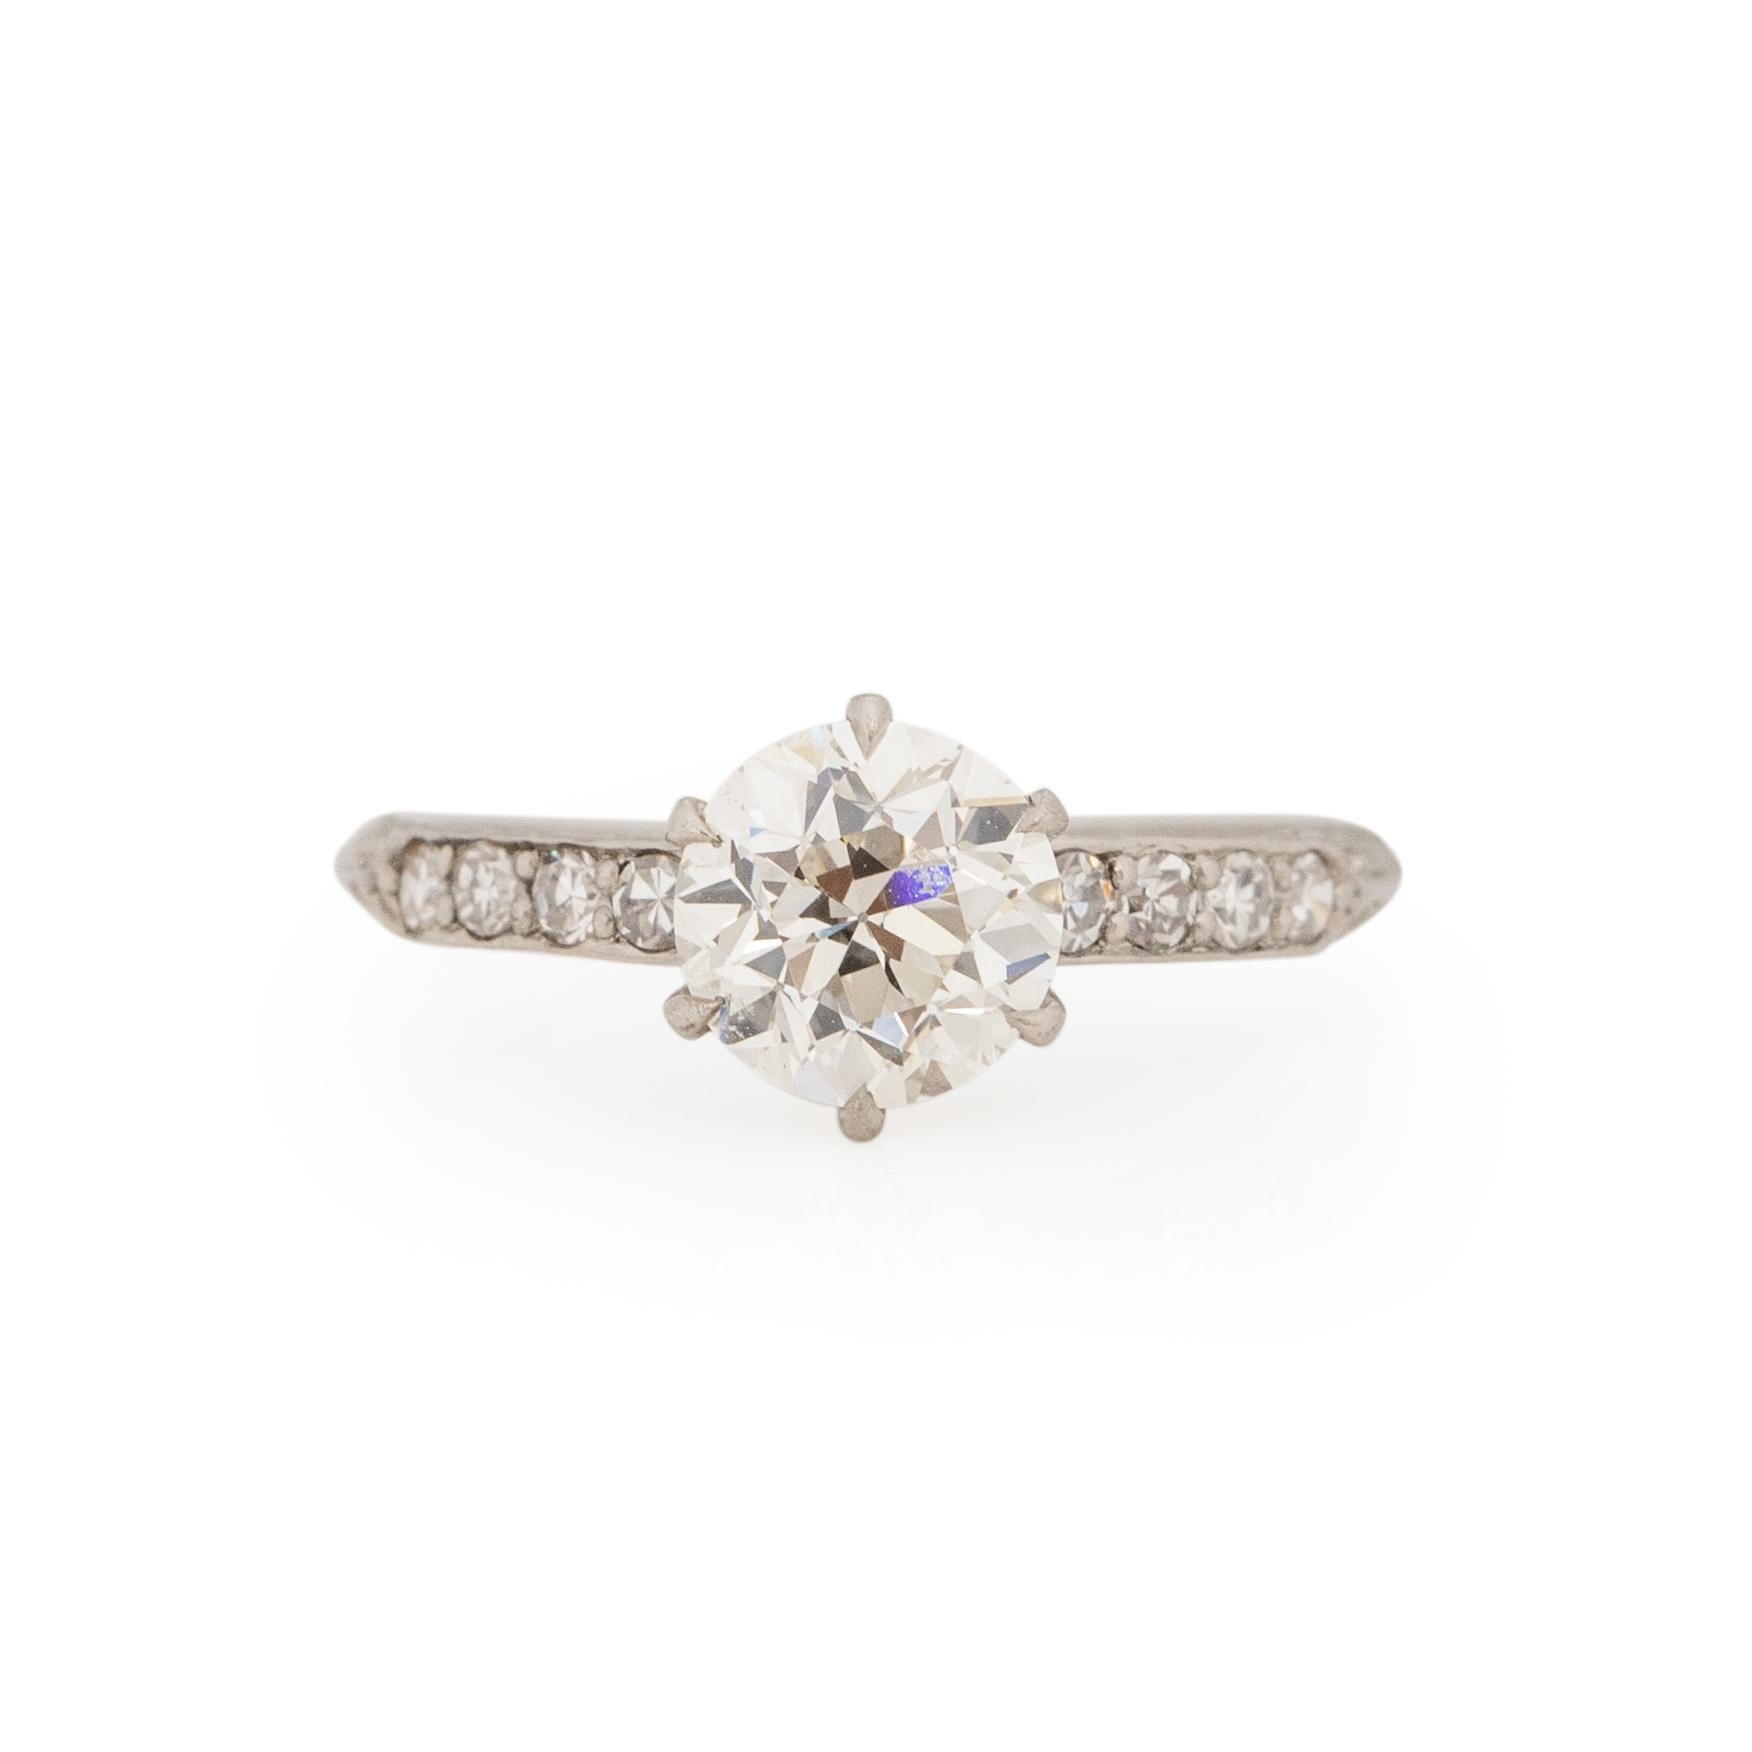 Here we have a outstanding vintage Tiffany & Co solitaire engagement ring, in near perfect condition. Being crafted in platinum plays a roll, in the clean and well preserved flowing engraving down the shank and up towards the gallery. This engraving